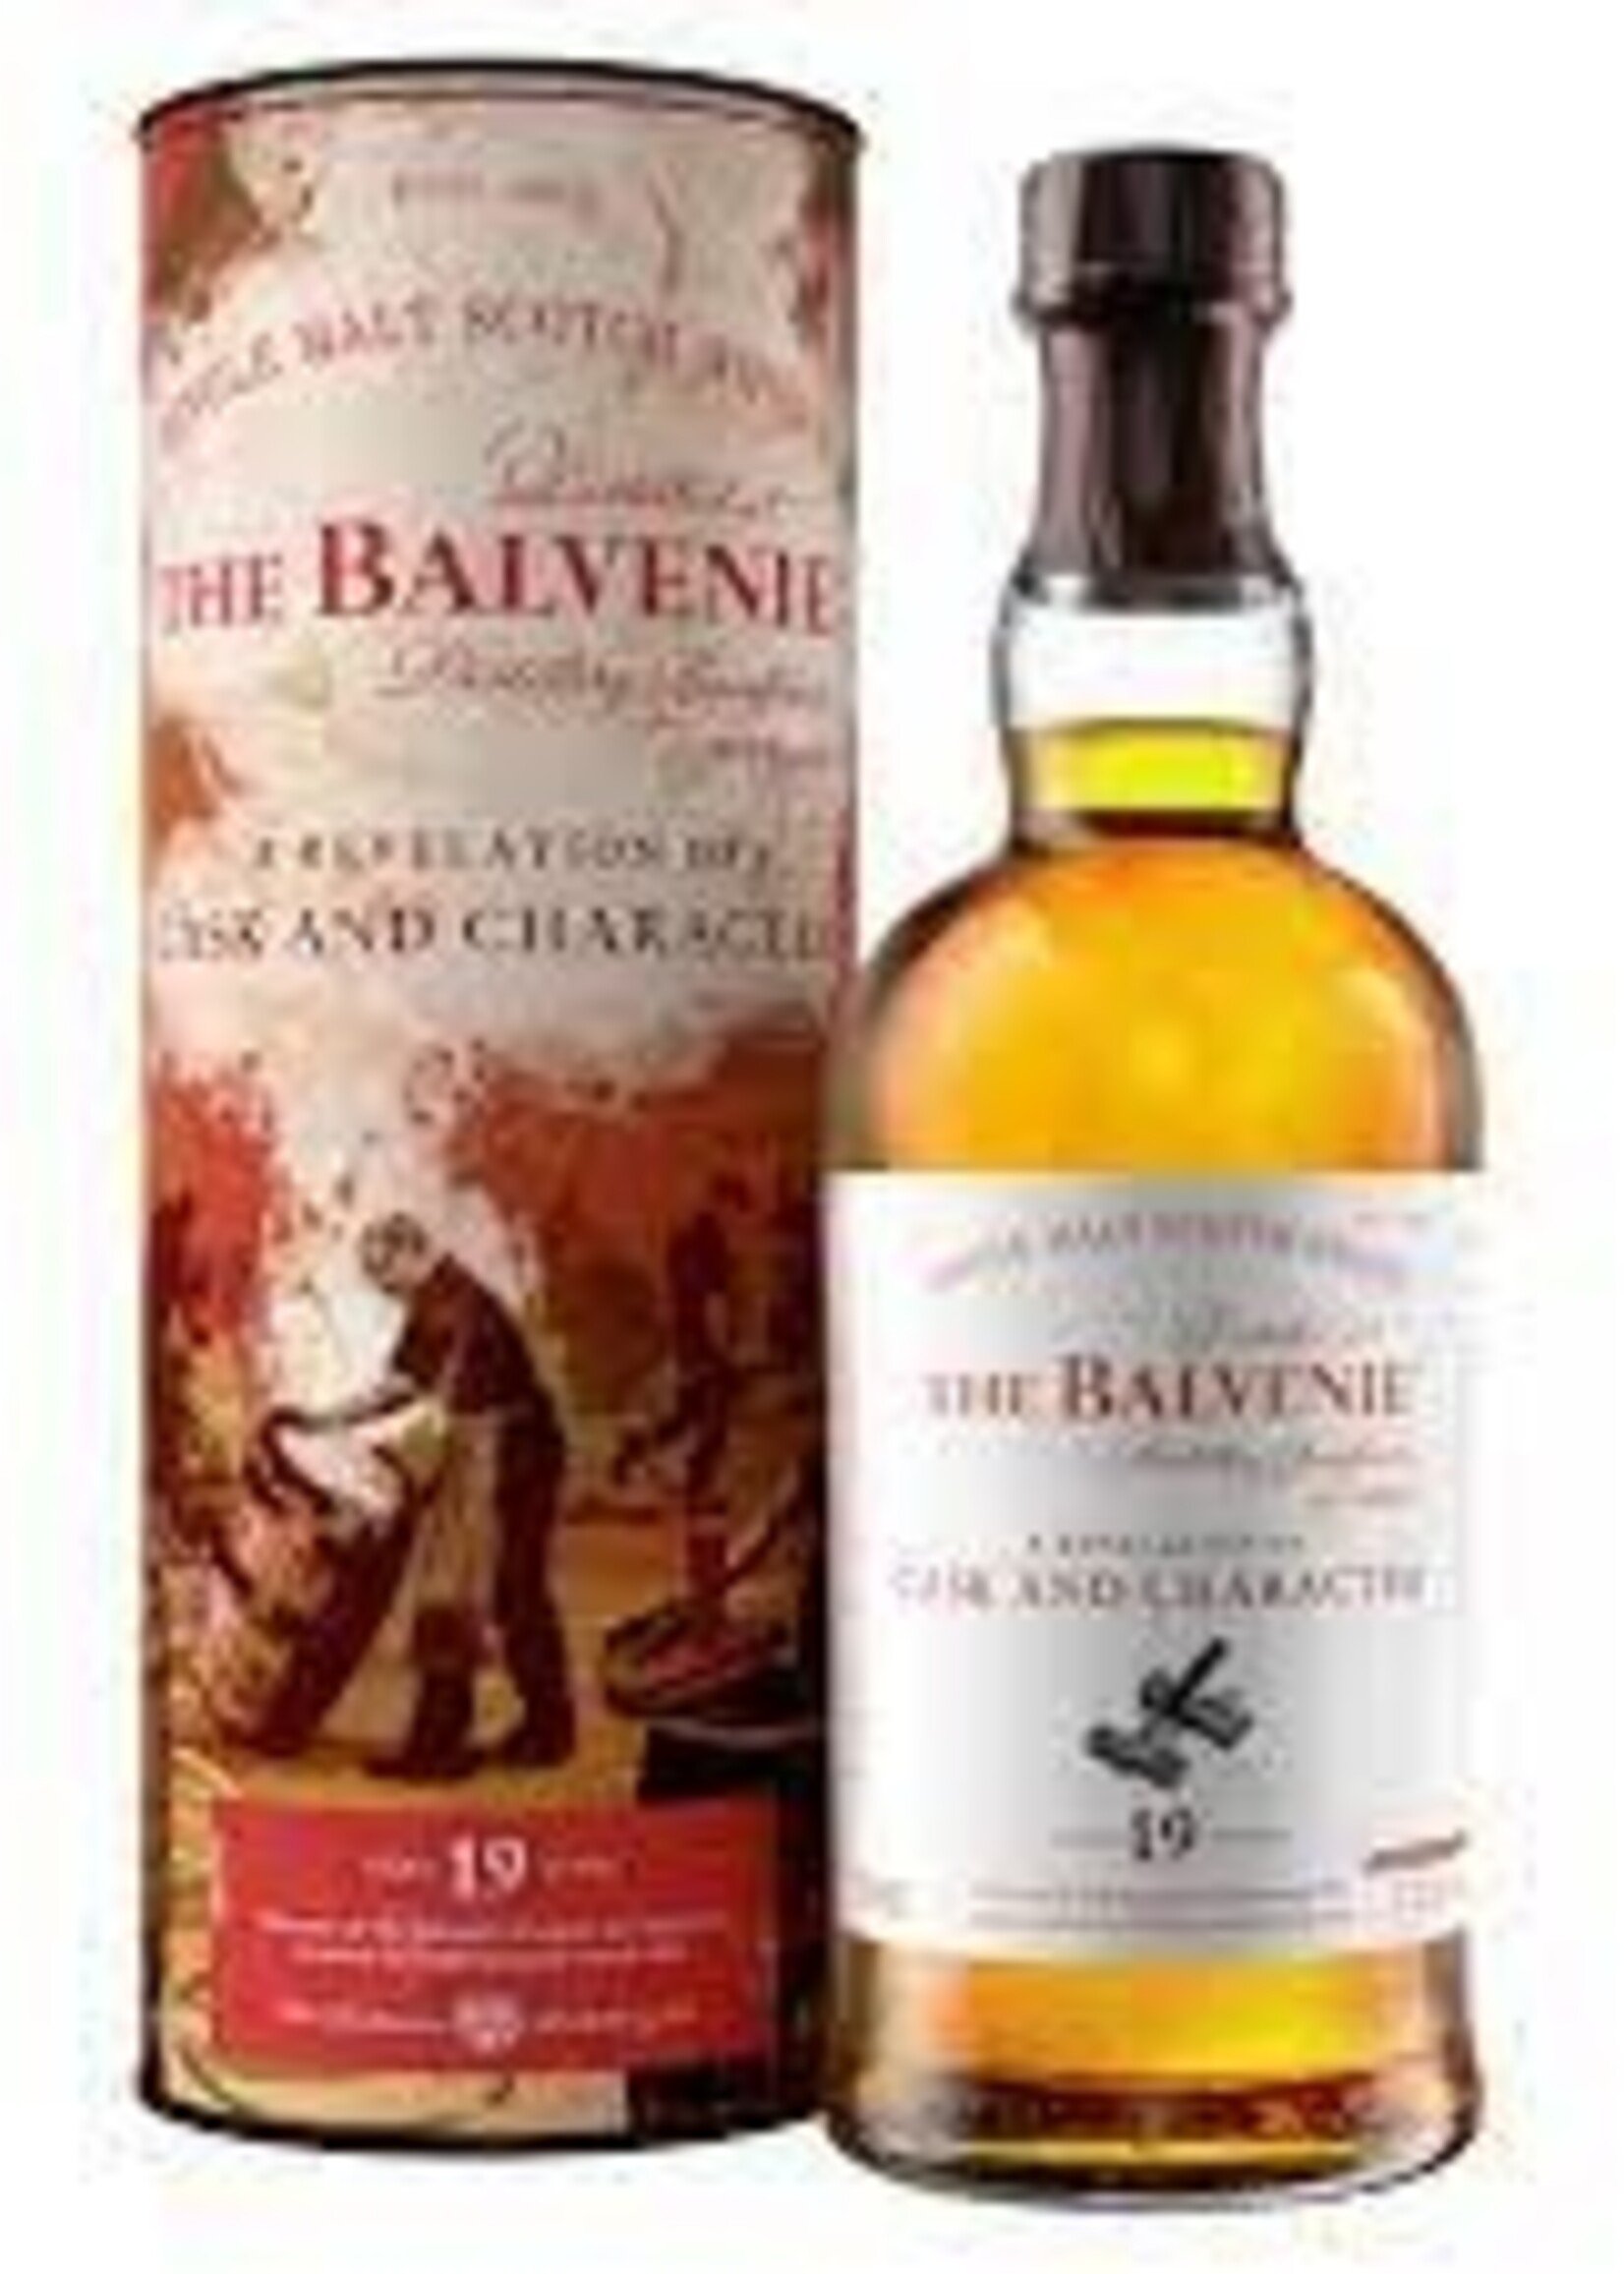 The Balvenie 19 Year Old "Cask and Character Sherry Cask"  750ML